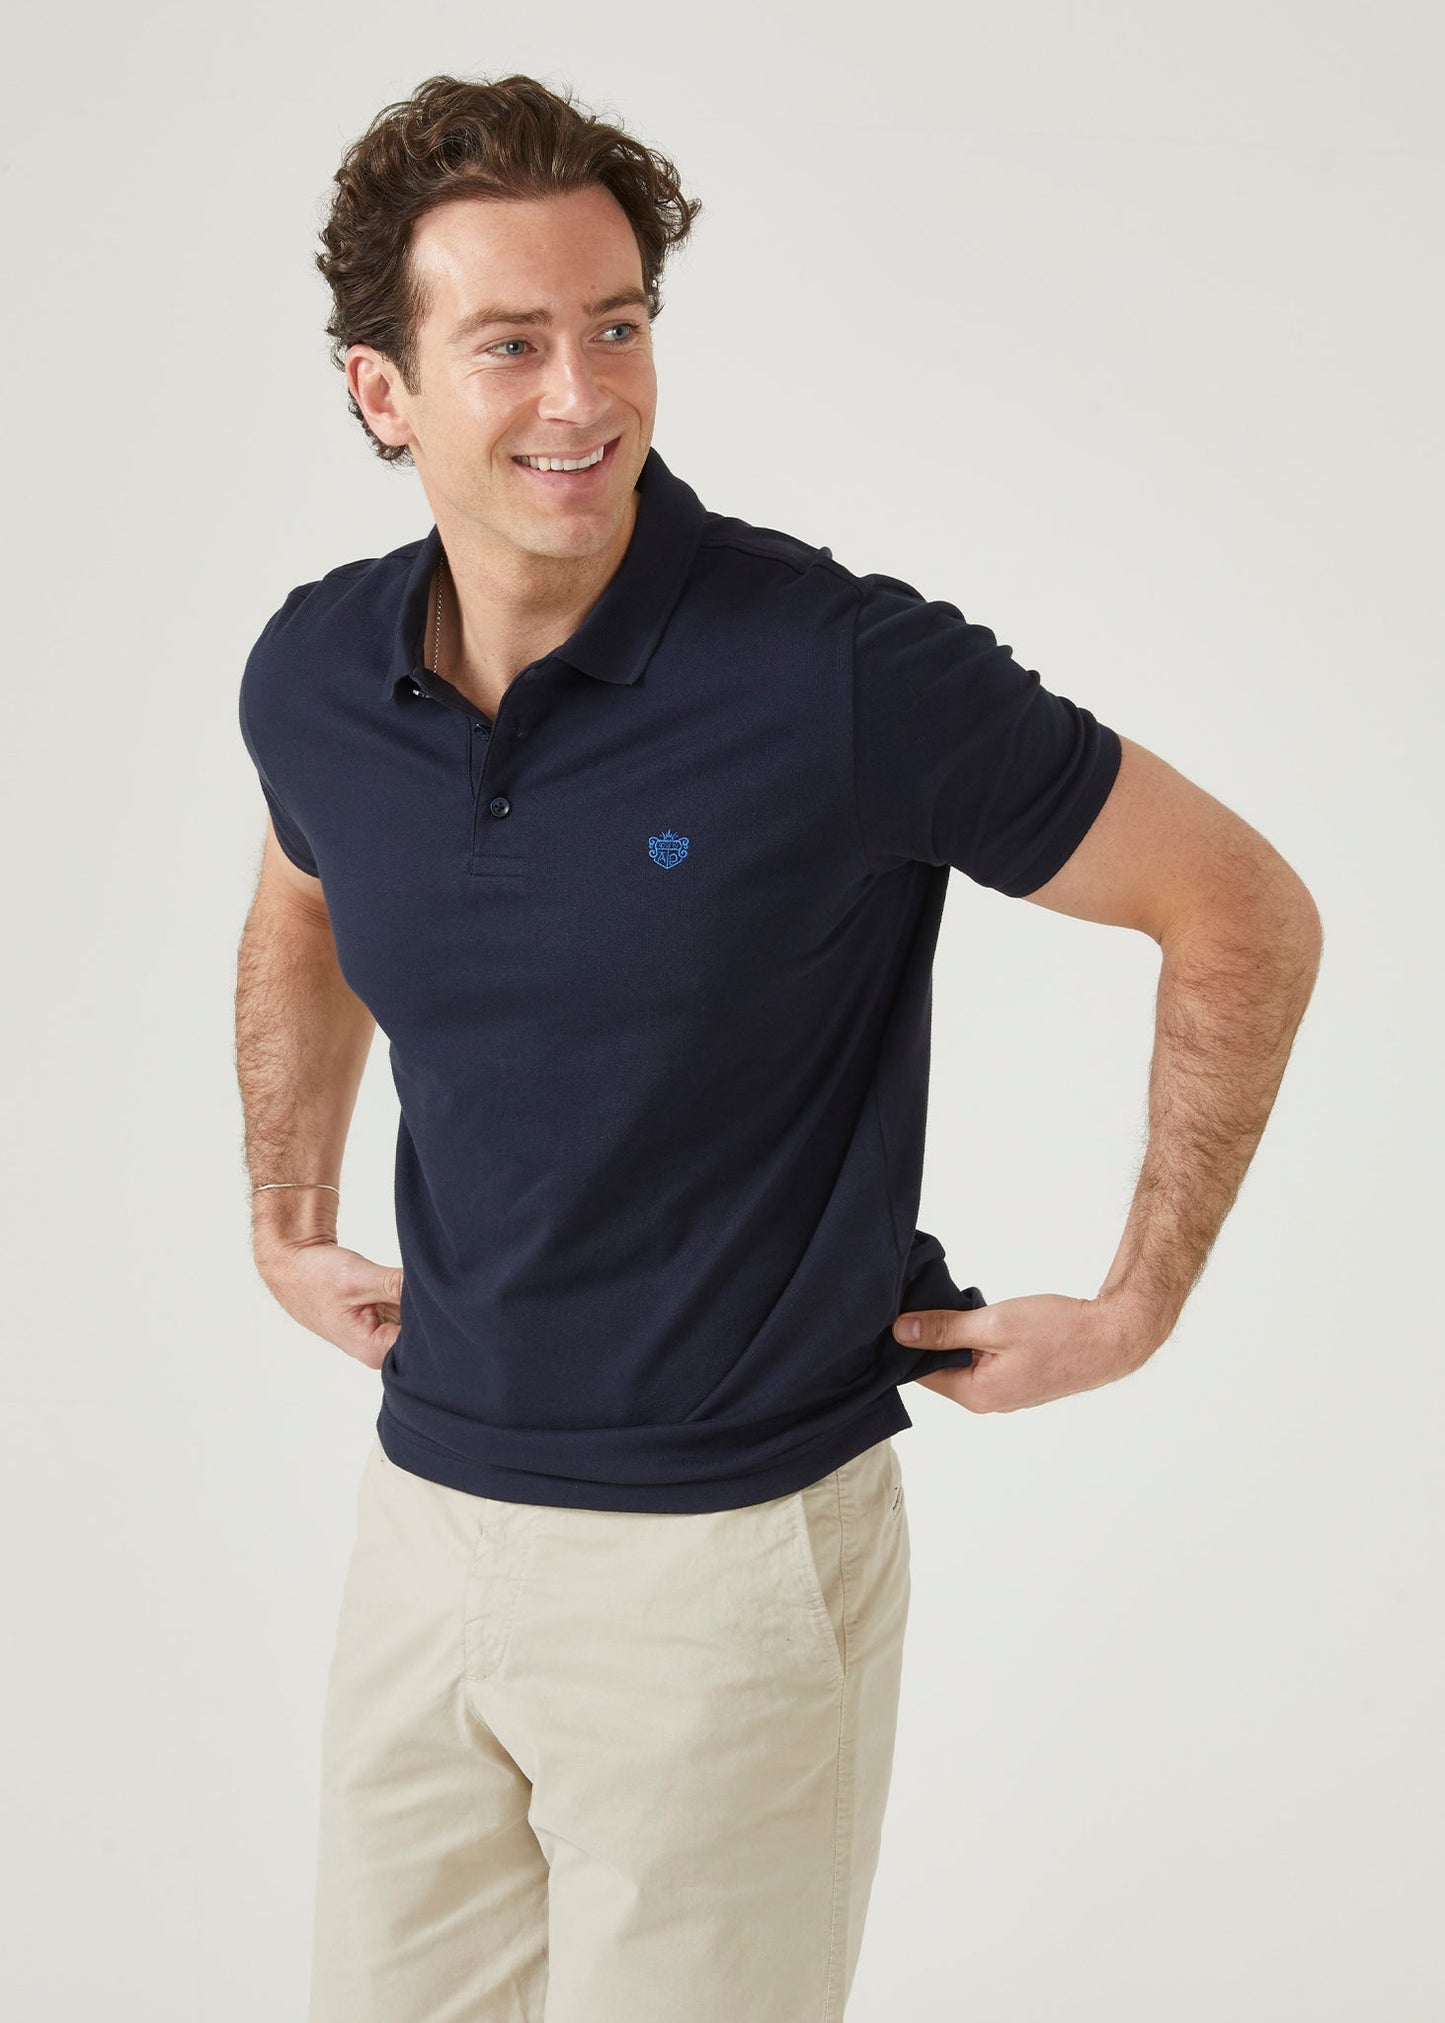 Pima cotton polo shirt in navy with AP emblem.